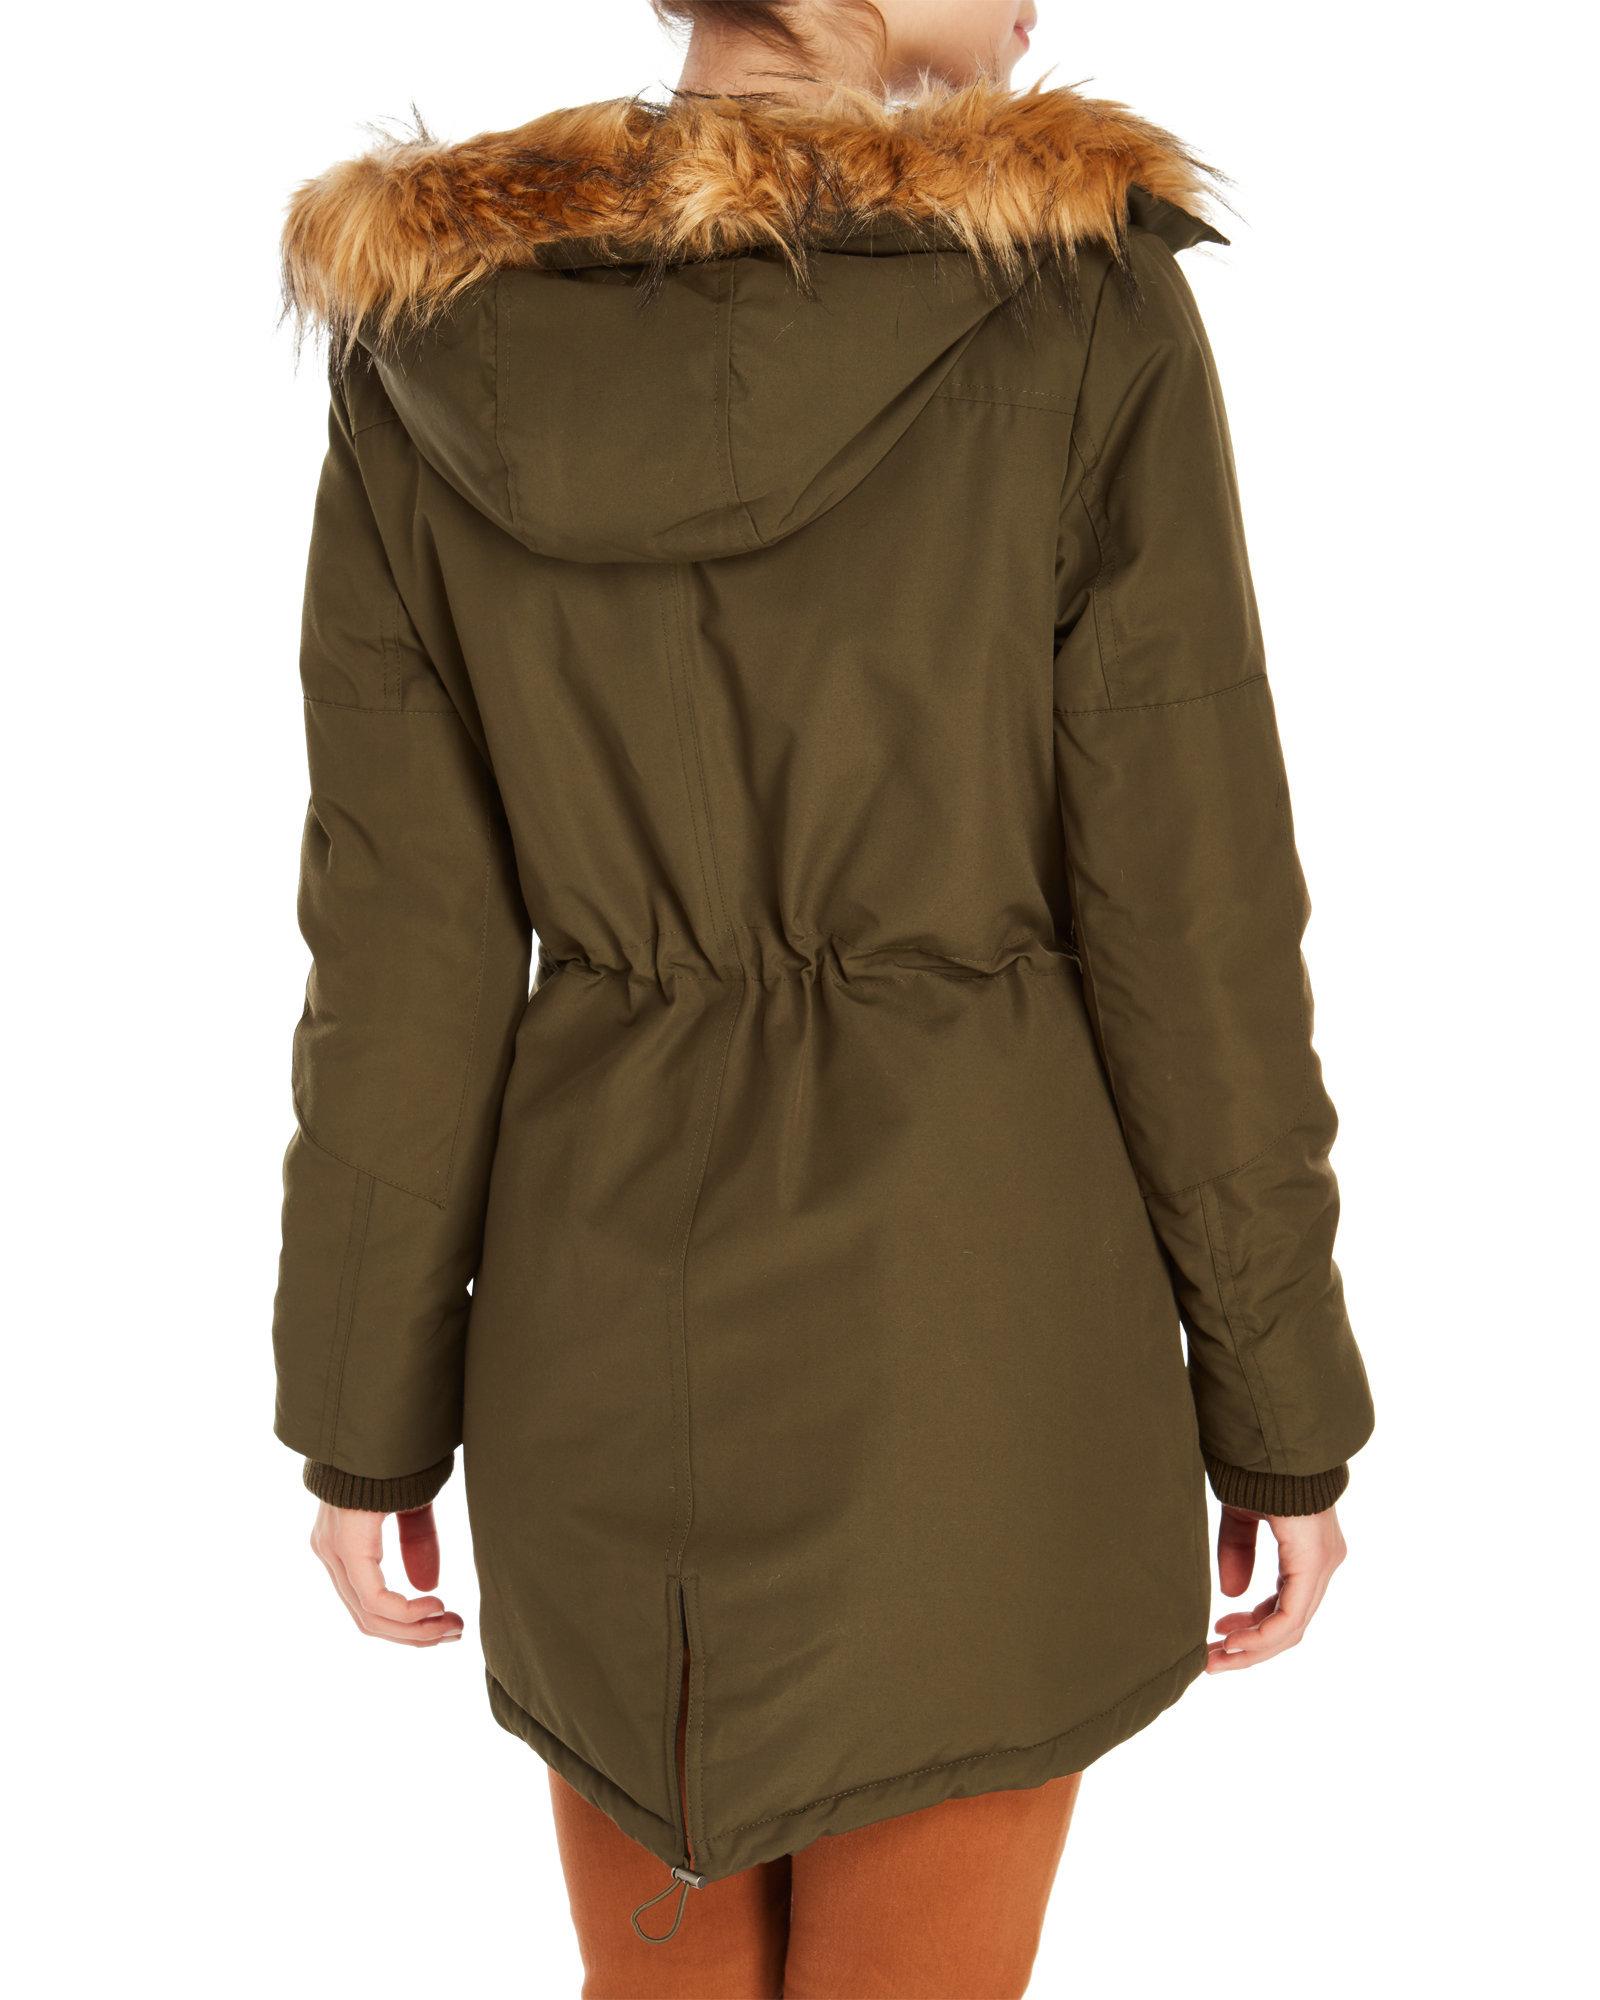 Levi's Faux-fur-trim Hooded Parka Jacket in Army Green (Green) - Lyst